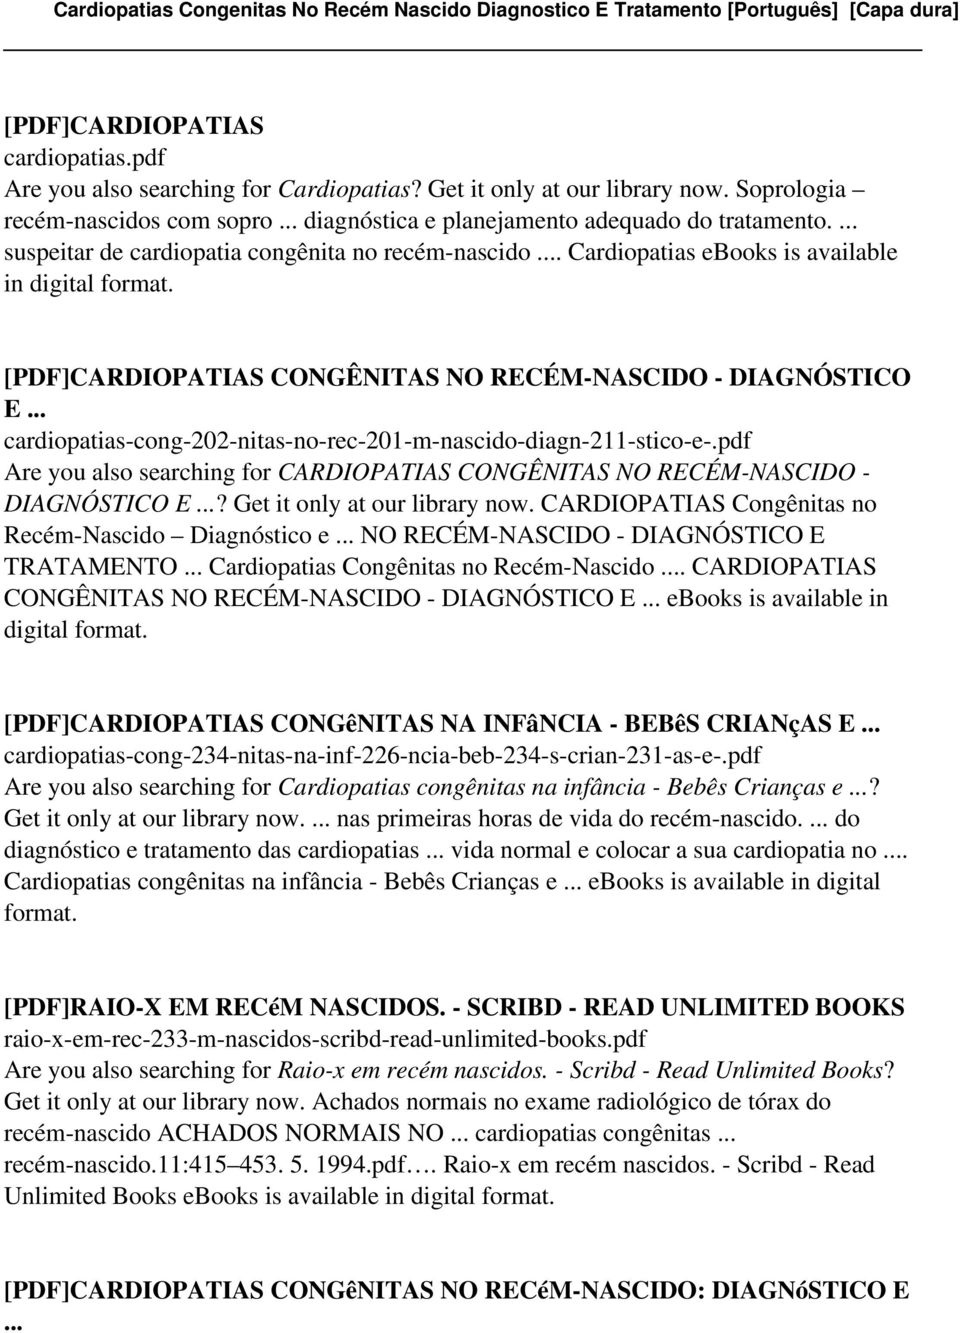 .. cardiopatias-cong-202-nitas-no-rec-201-m-nascido-diagn-211-stico-e-.pdf Are you also searching for CARDIOPATIAS CONGÊNITAS NO RECÉM-NASCIDO - DIAGNÓSTICO E...? Get it only at our library now.